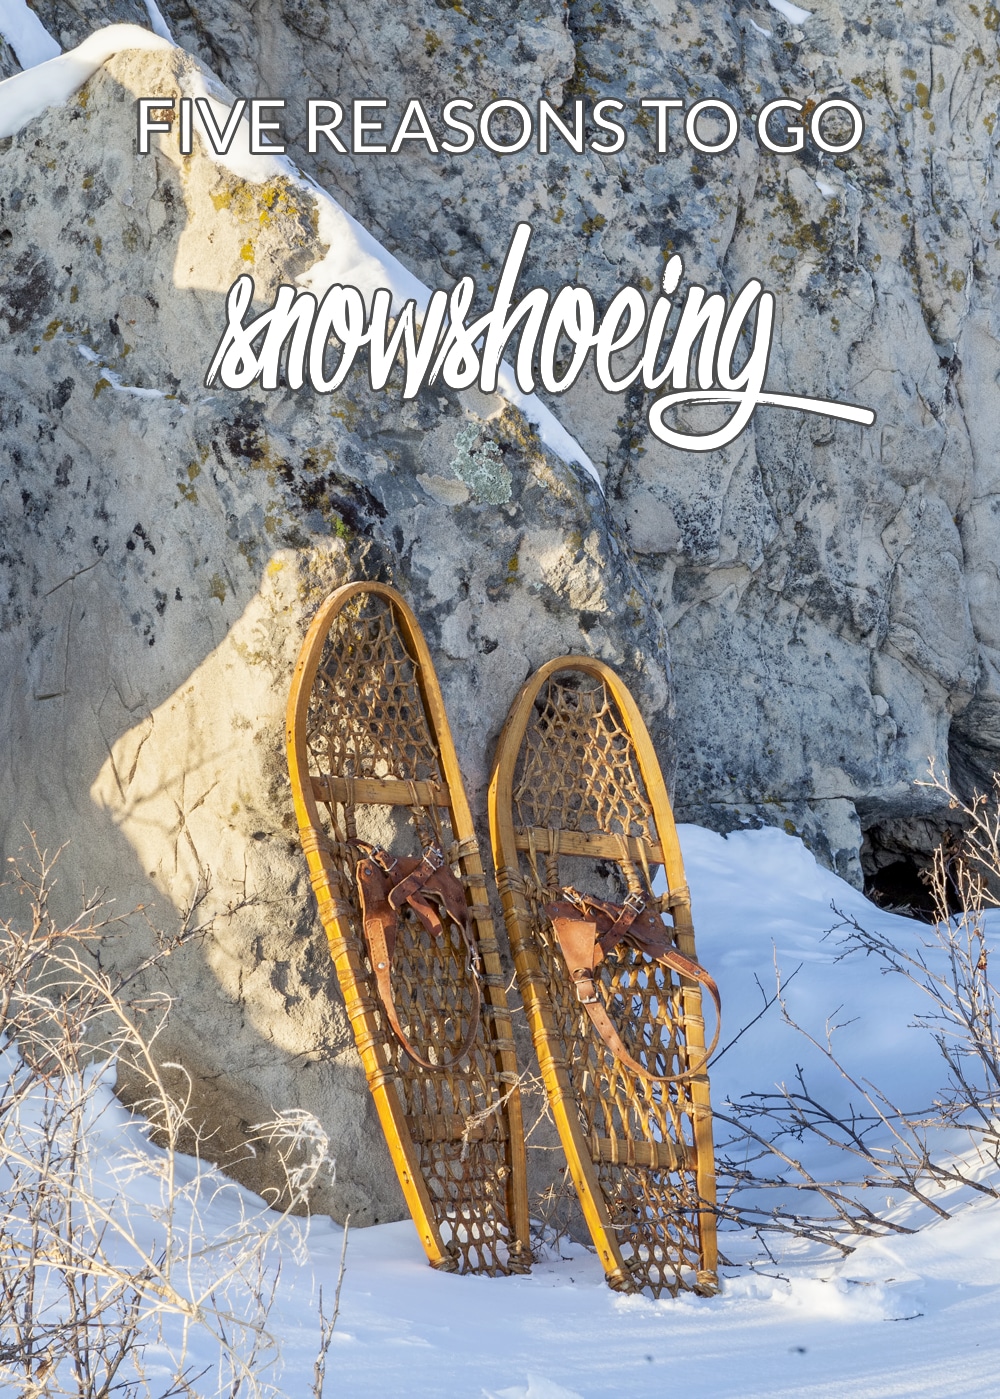 Five Reasons to go Snowshoeing